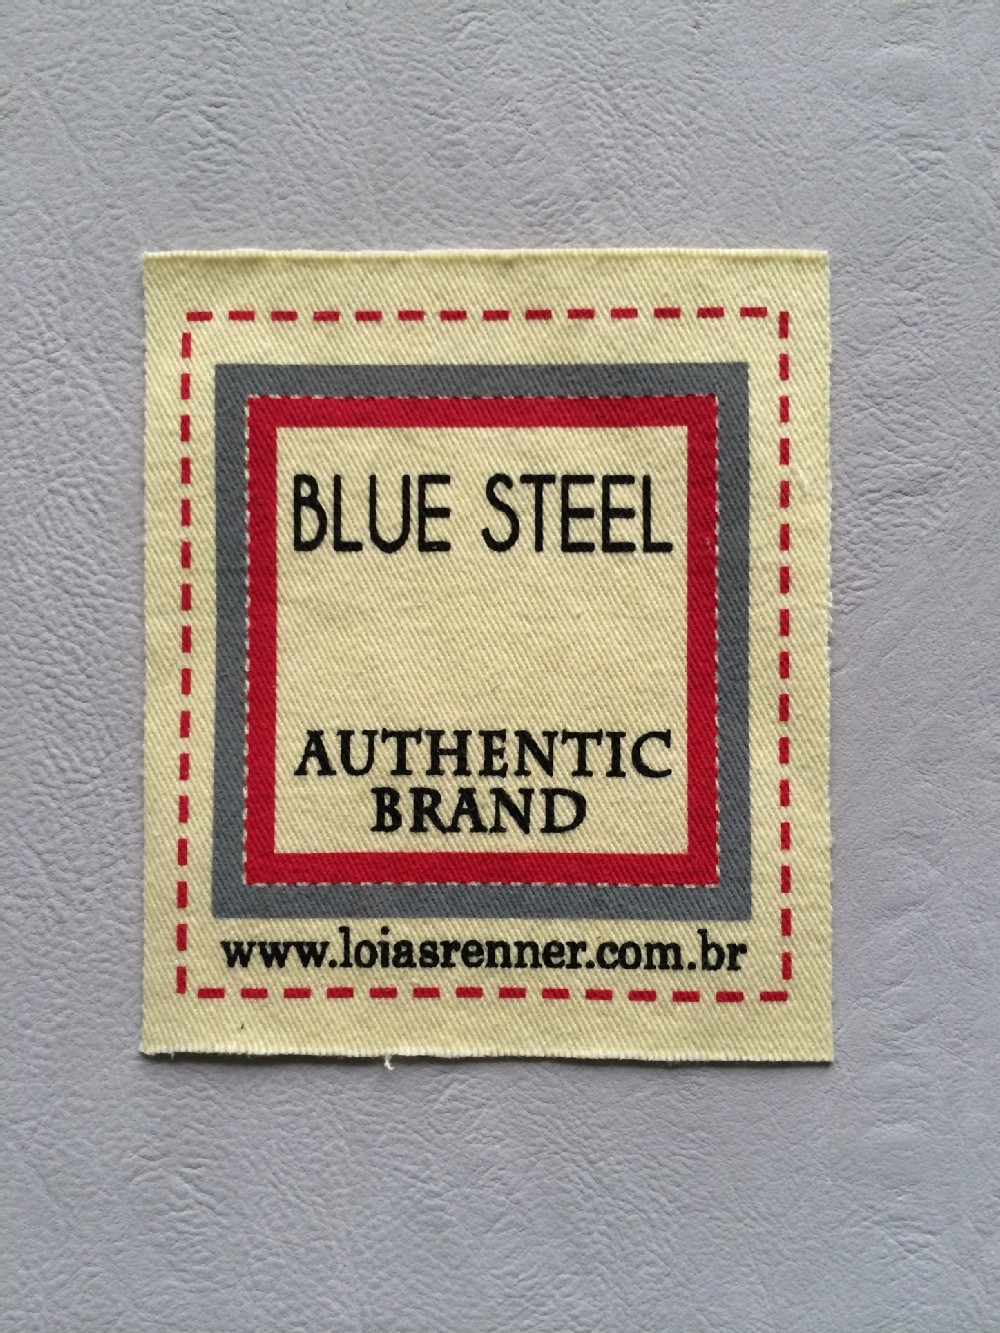 Cotton labels with silk screen printing for clothing